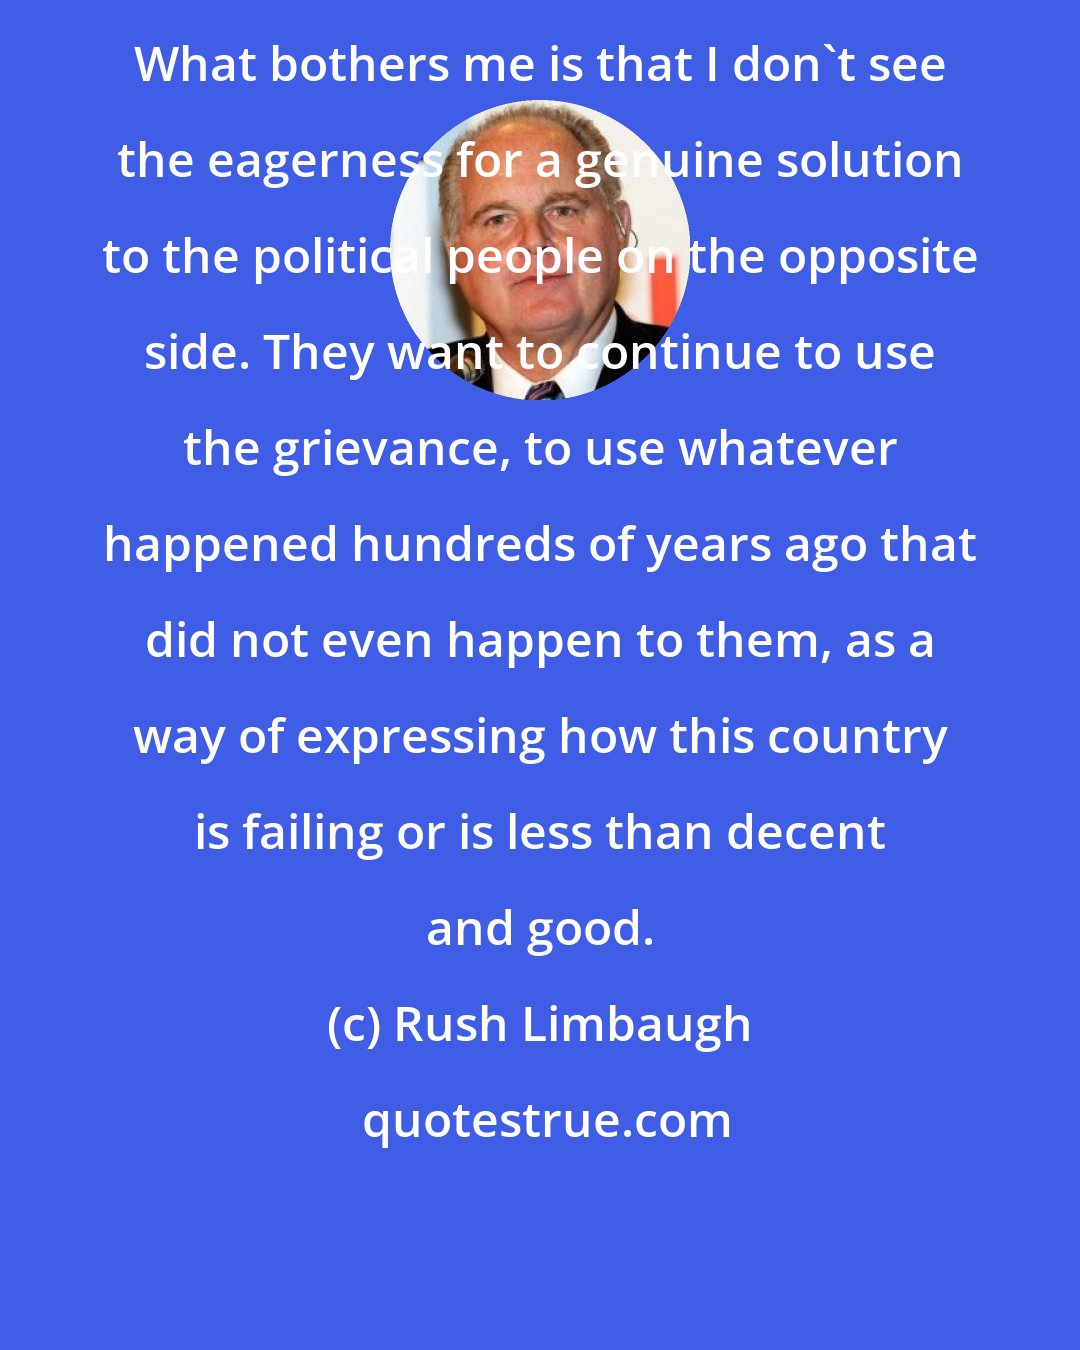 Rush Limbaugh: What bothers me is that I don't see the eagerness for a genuine solution to the political people on the opposite side. They want to continue to use the grievance, to use whatever happened hundreds of years ago that did not even happen to them, as a way of expressing how this country is failing or is less than decent and good.